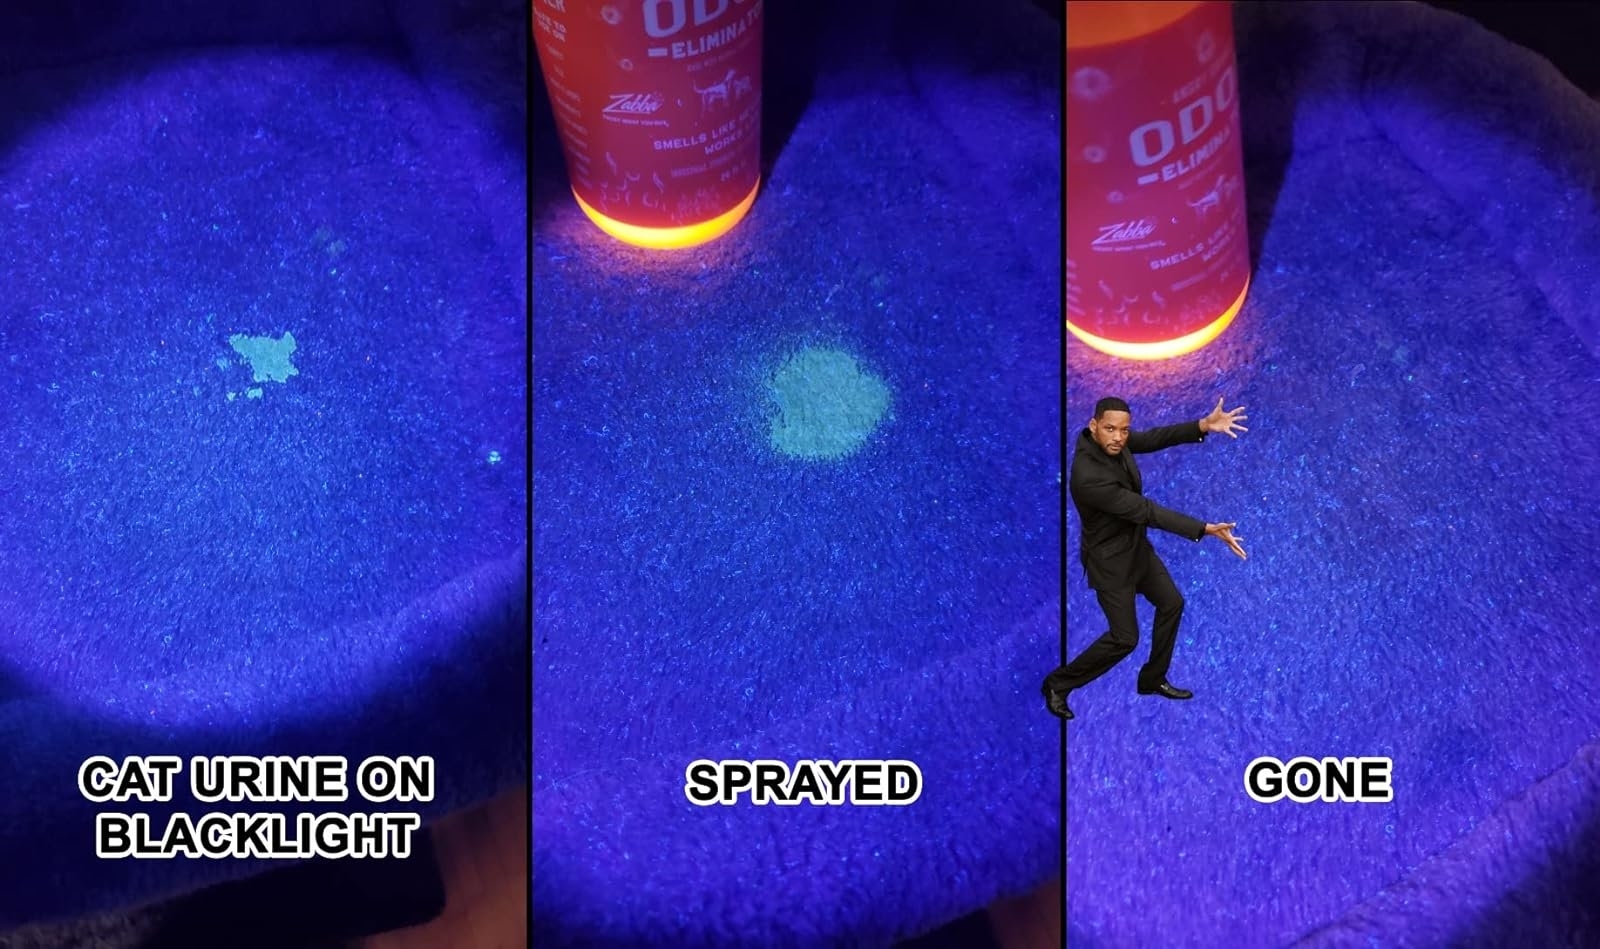 a reviewer photo showing a stain in various stages labeled &quot;cat urine on backlight&quot;, &quot;sprayed&quot;, and &quot;gone&quot;